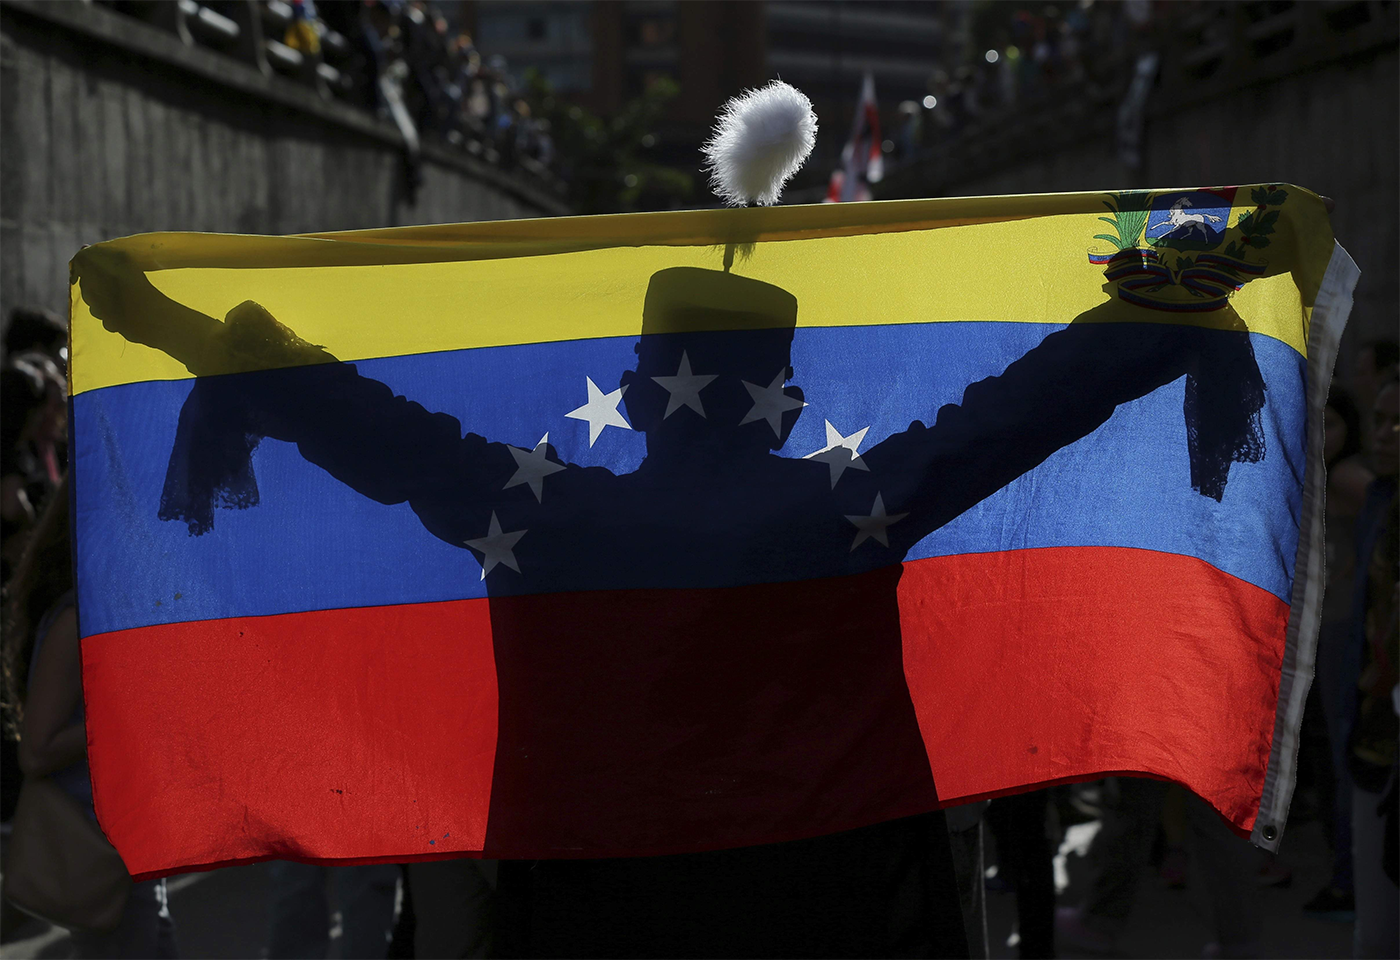 Pivotal vote on rewriting constitution to be held Sunday in Venezuela